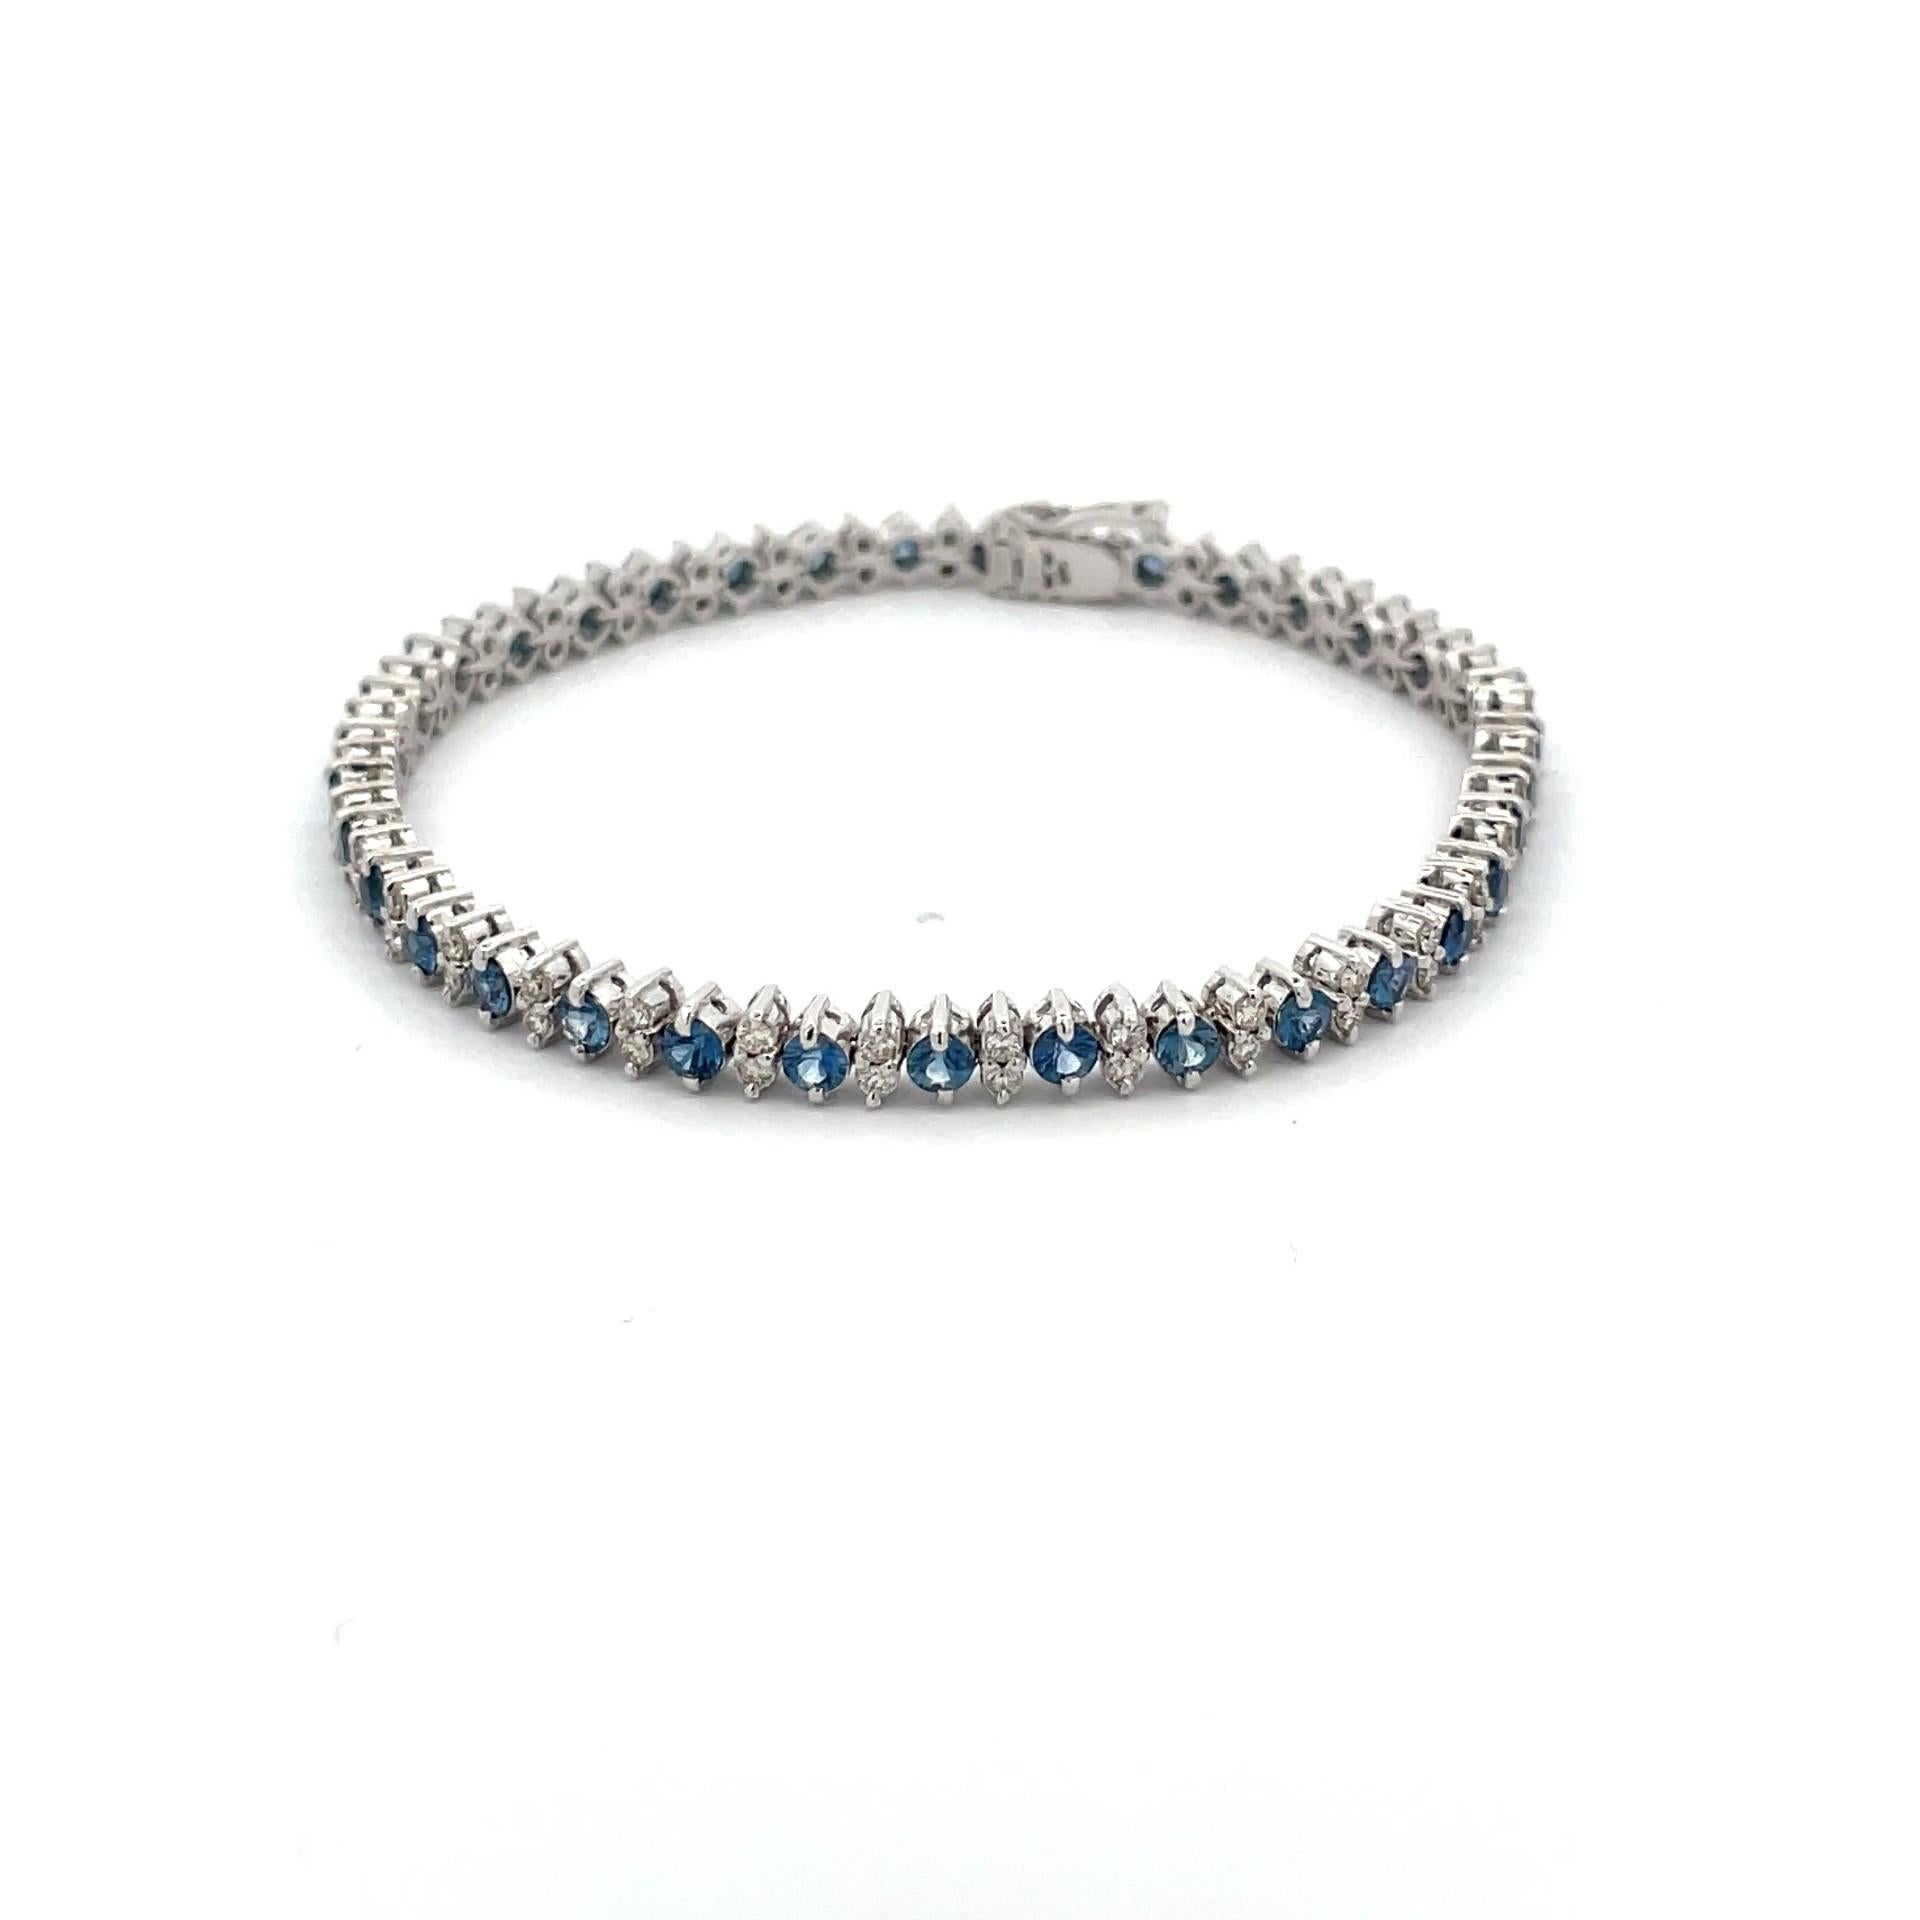 Alternative natural blue sapphire and brilliant cut diamond (in a marquis shape) bracelet in 18kt white gold. The colour combination of diamonds and sapphires is absolutely gorgeous.

35 natural blue sapphires weighing 4.20ct total weight

70